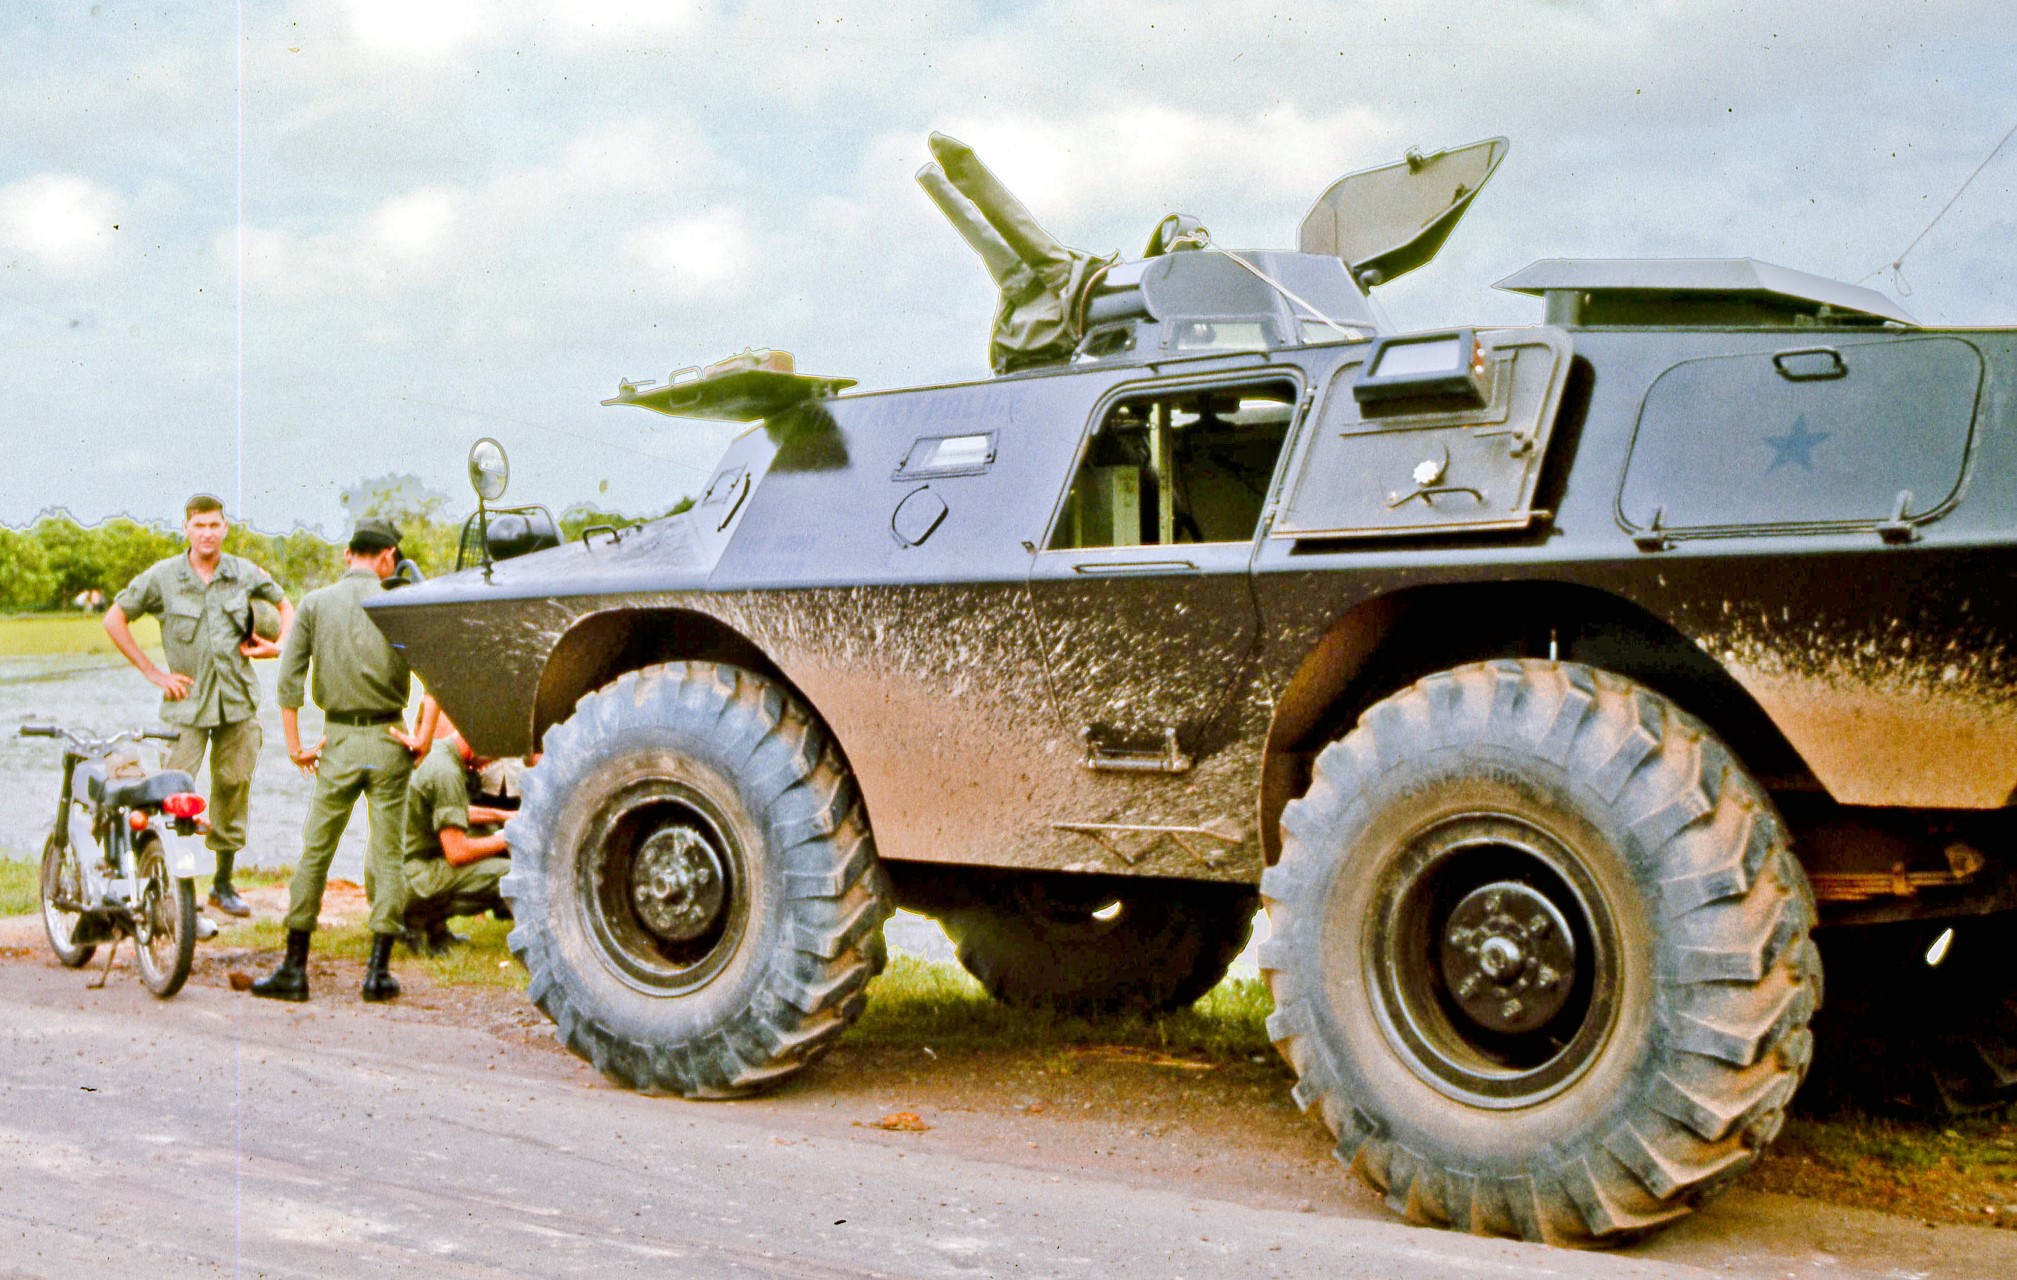 military, vietnam war, armored personnel carrier, cadillac gage, wars